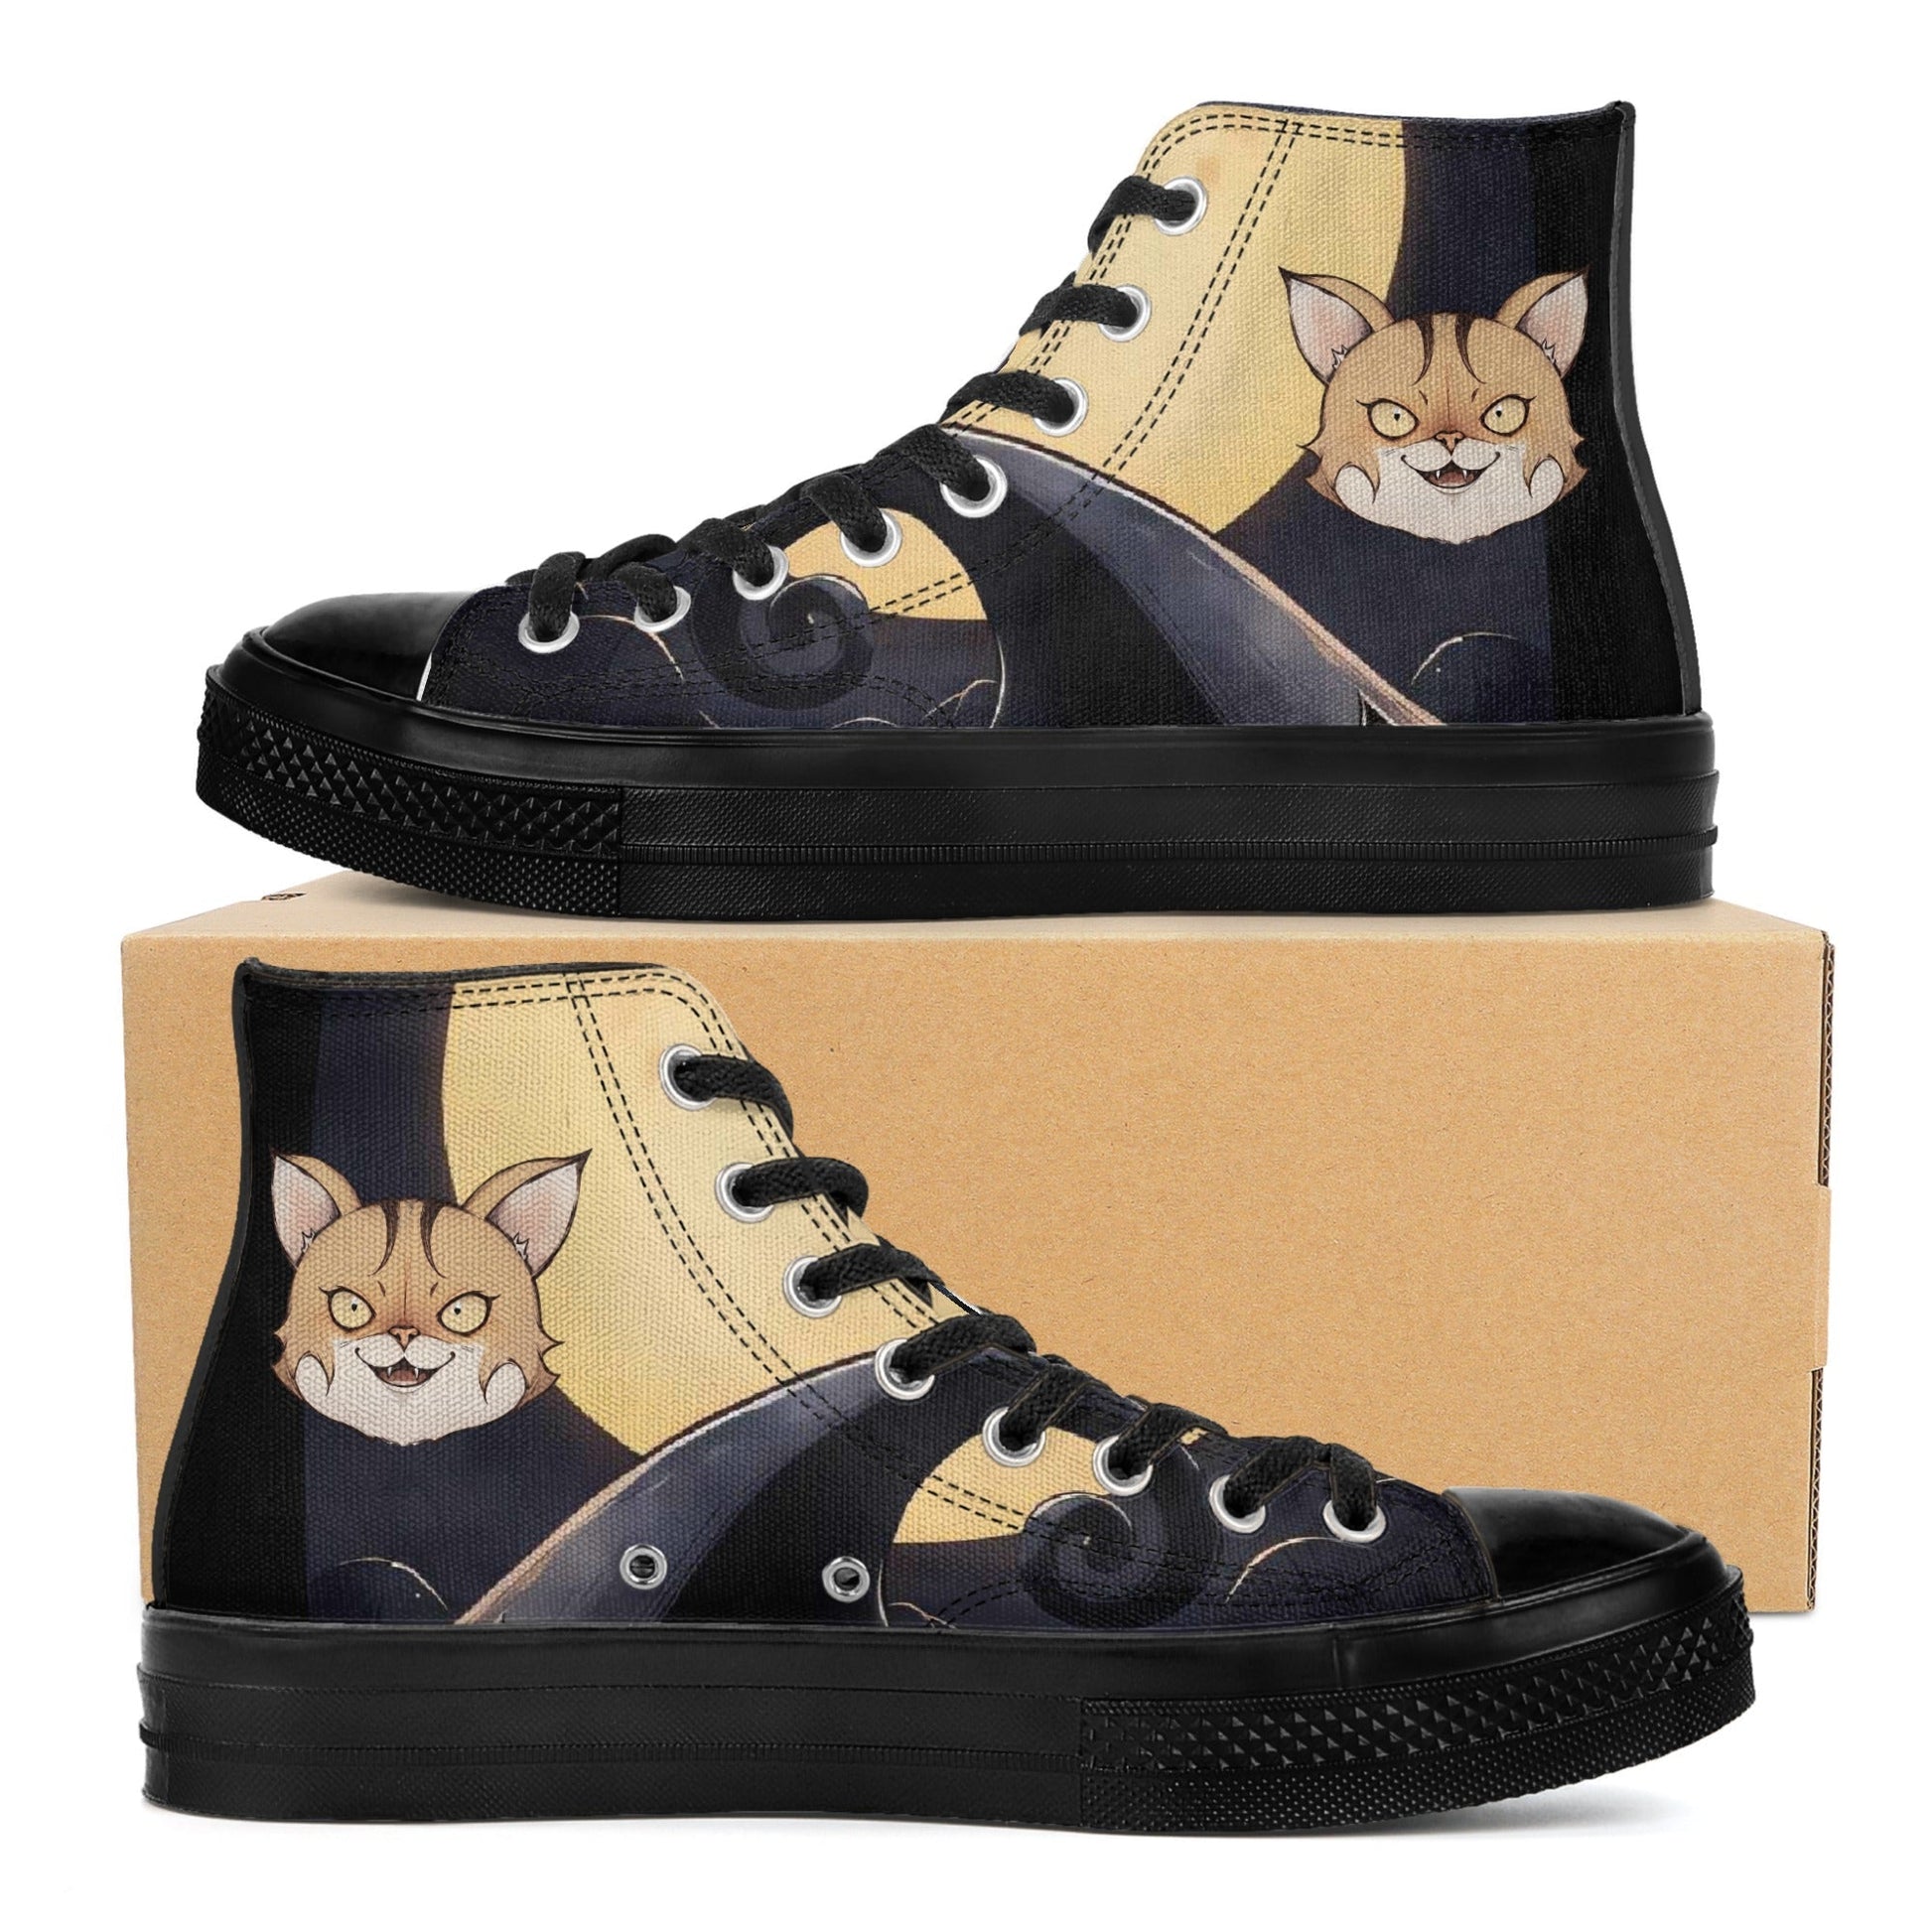 Stand out  with the  Nightmare Before Hey Nugget Mens Classic Black High Top Canvas Shoes  available at Hey Nugget. Grab yours today!